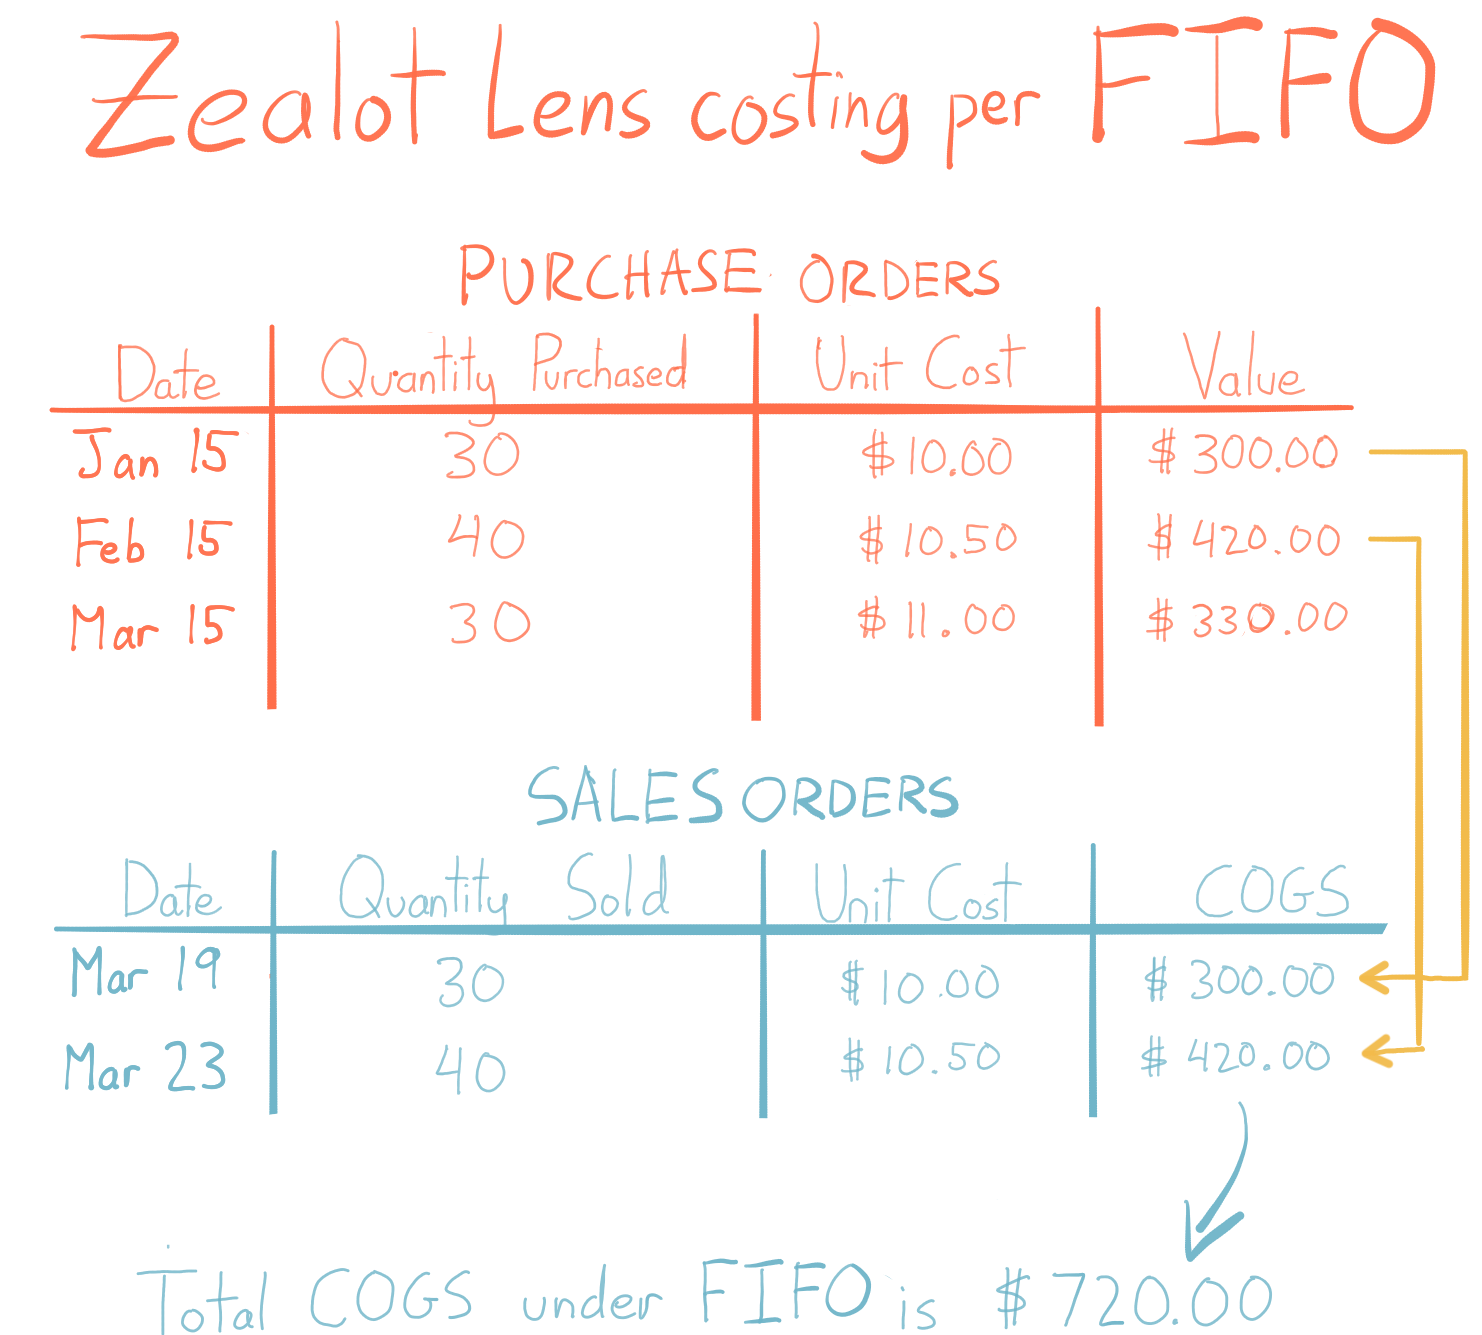  This tables highlights how the FIFO method affects cost. There are a series of purchase orders on top and a series of sales orders on the bottom. Arrows connect the first purchase order to the first sales order, and the second purchase order to the second sales order. The COGS for both sales is $720.